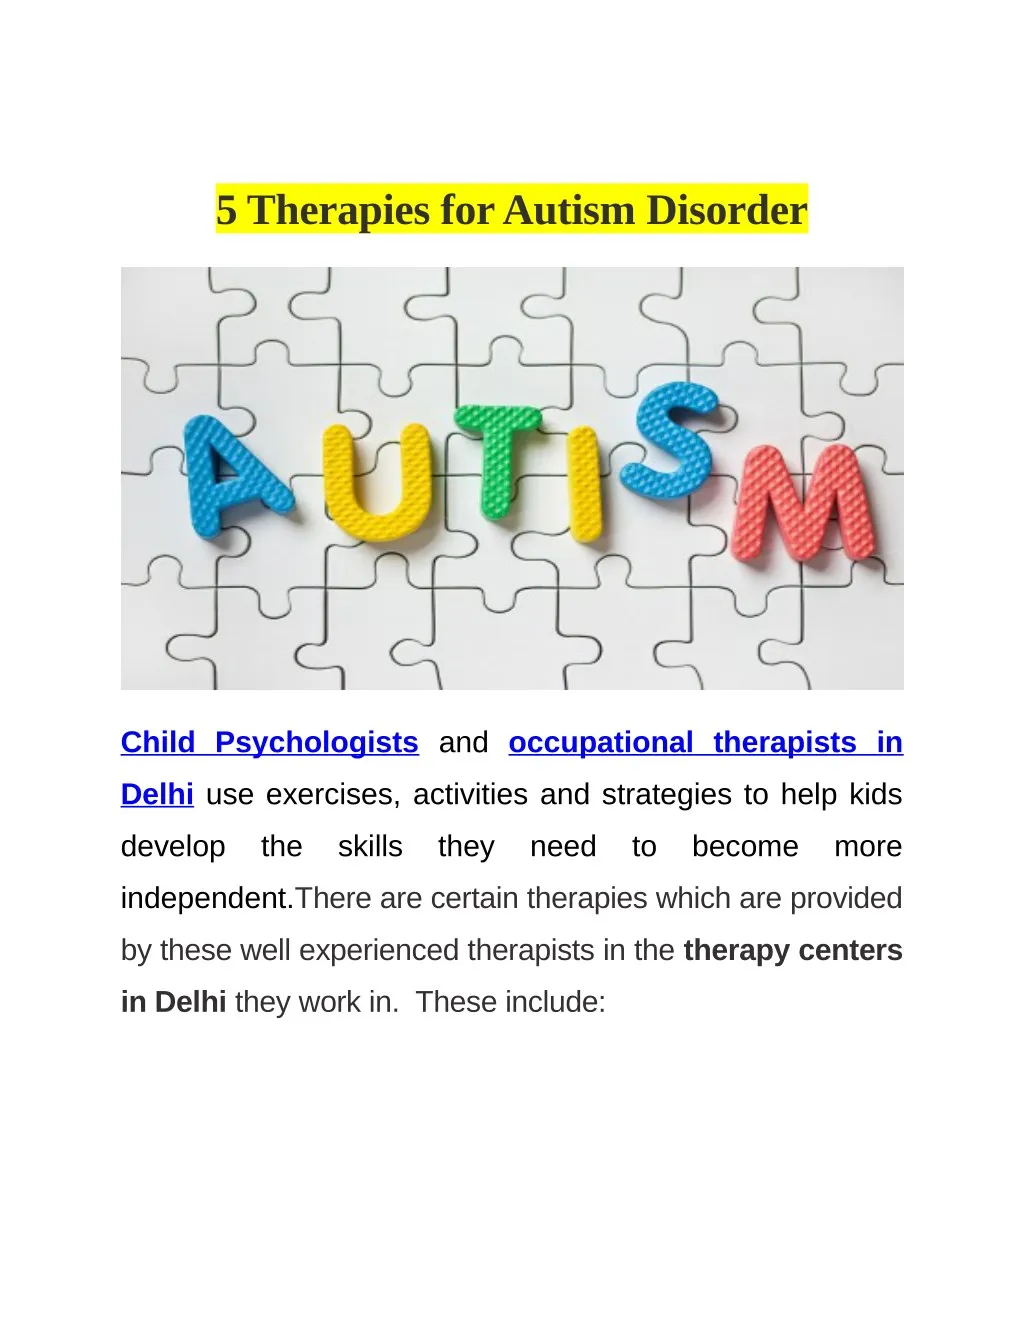 5 therapies for autism disorder